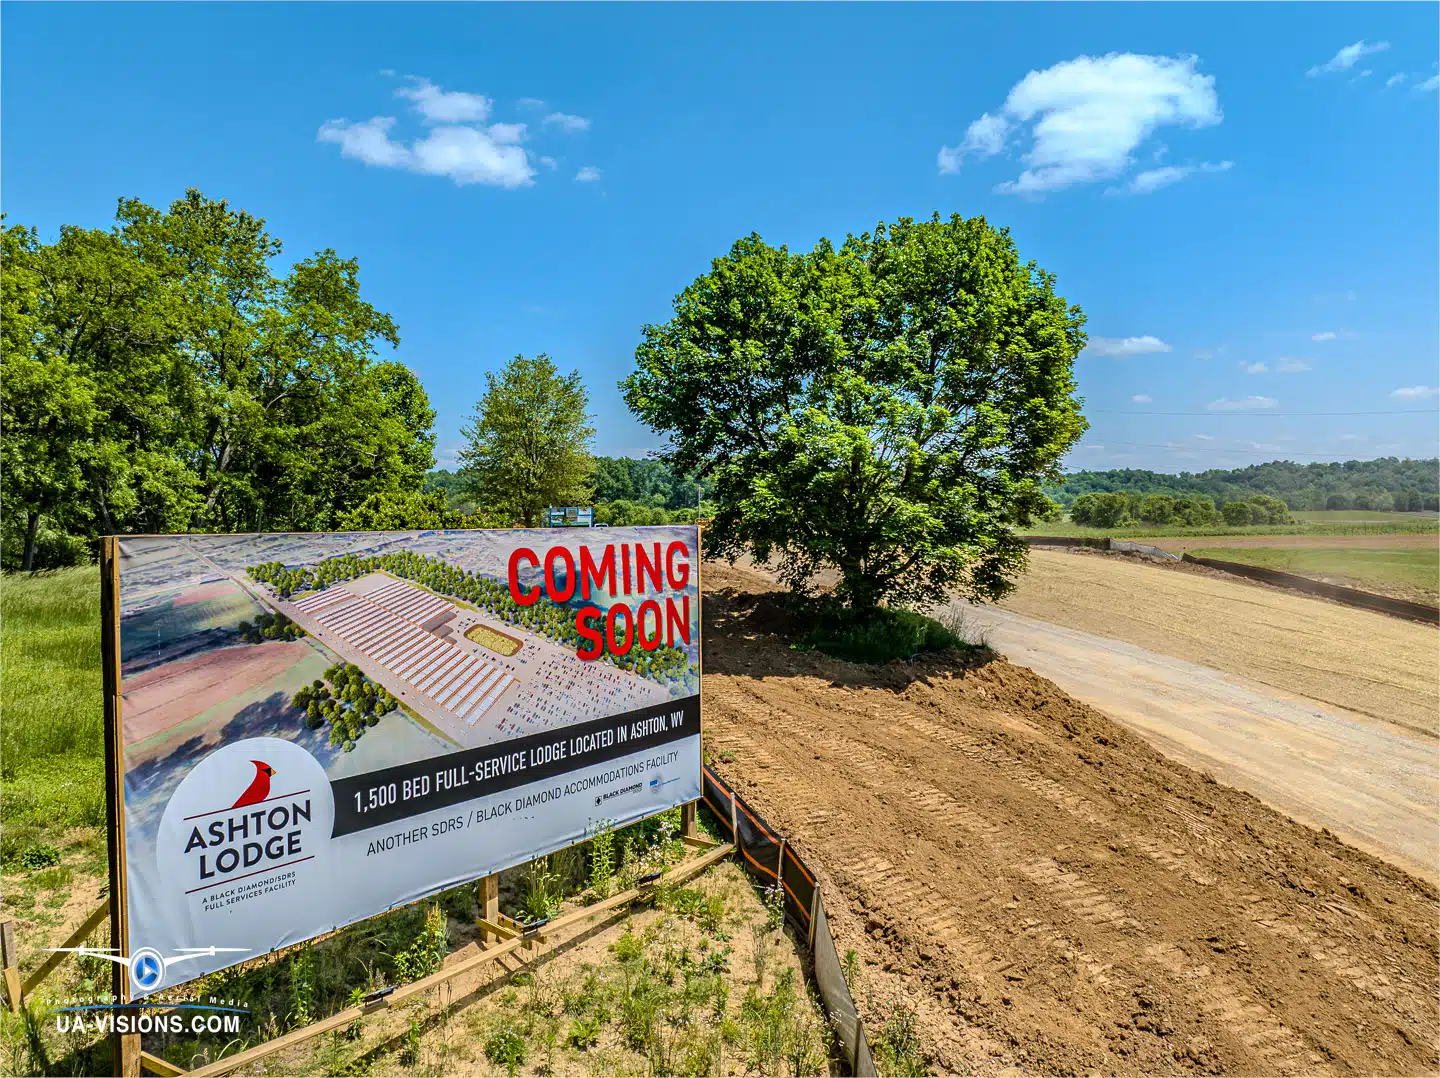 A billboard announcing the future site of Ashton Lodge amidst an active construction landscape, by UA-Visions.